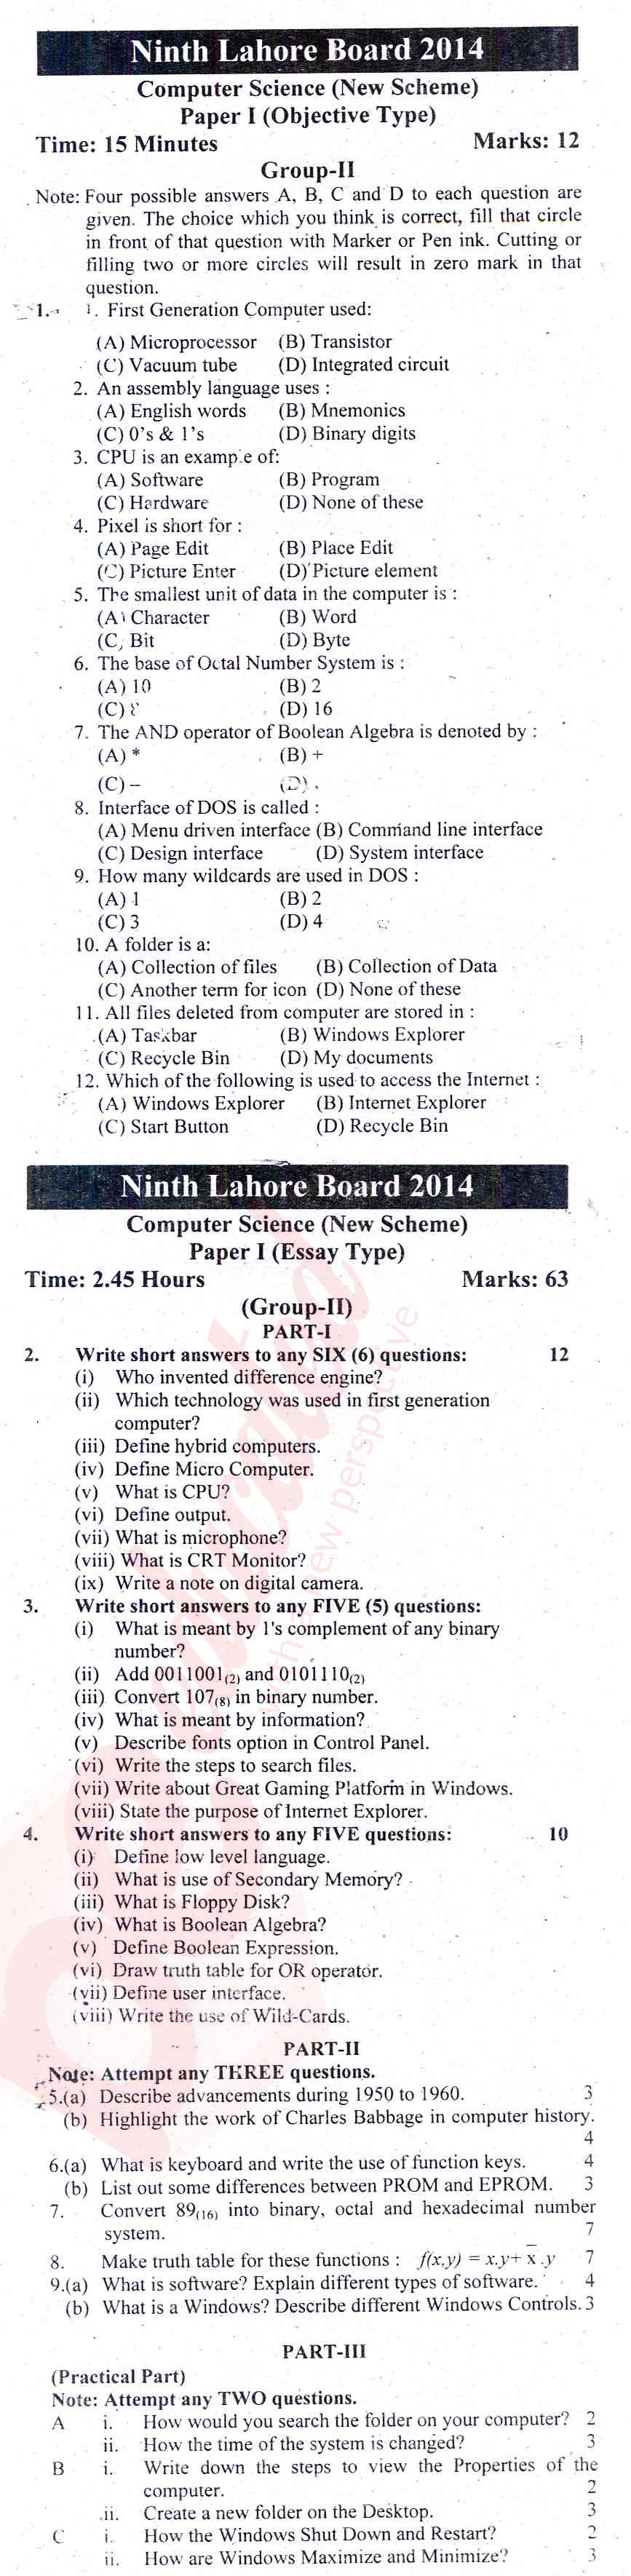 Computer Science 9th English Medium Past Paper Group 2 BISE Lahore 2014